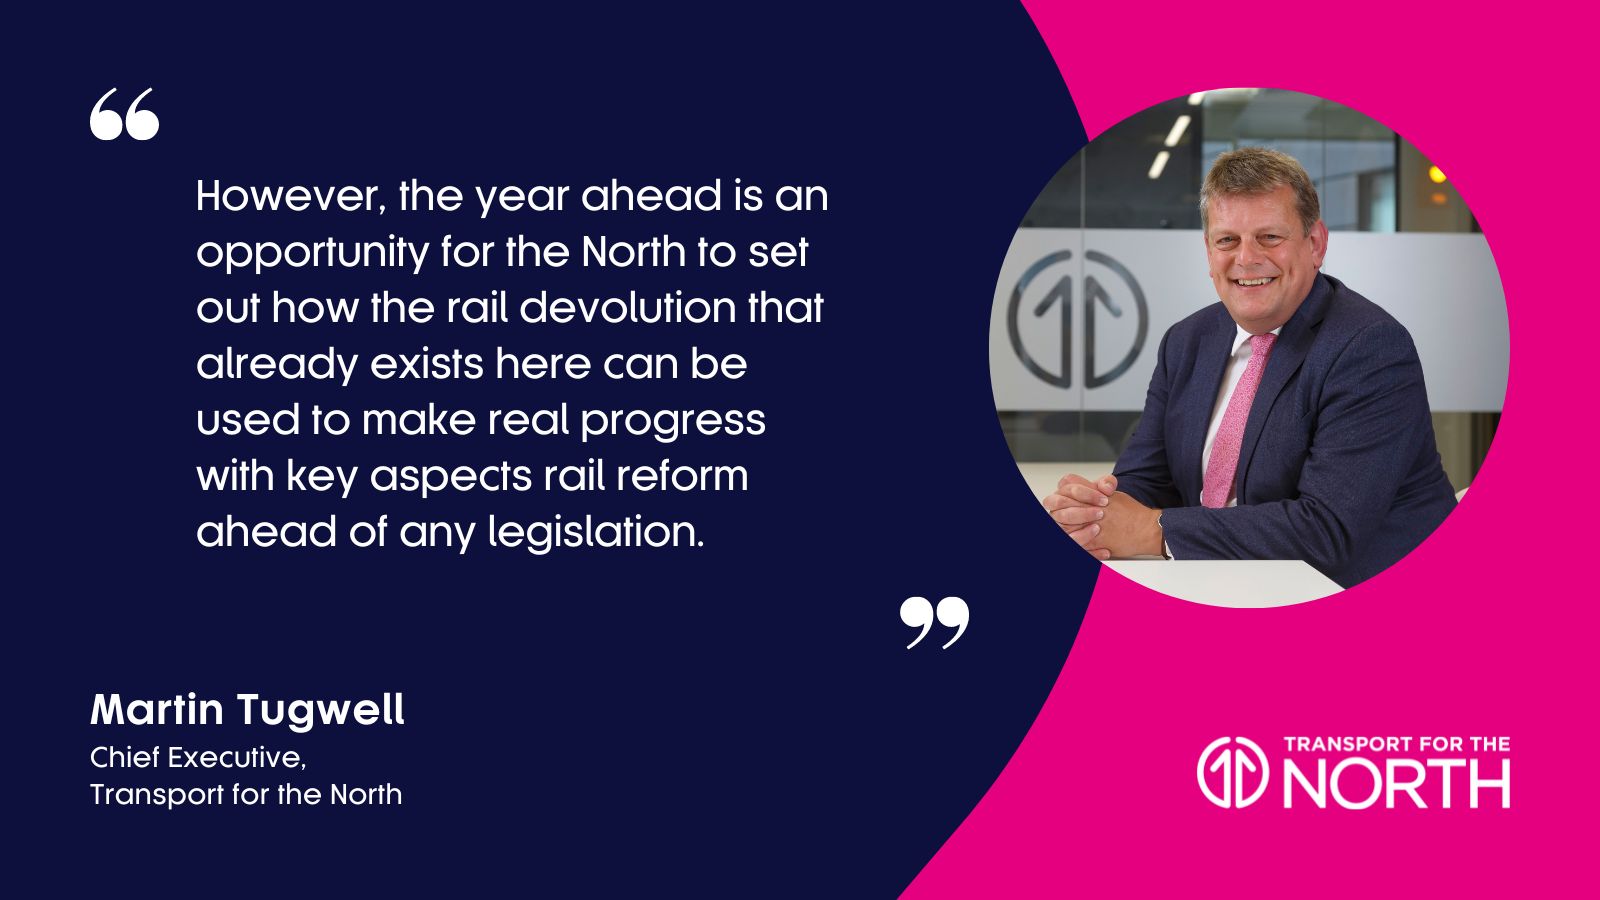 Martin Tugwell on the year ahead for rail in the North